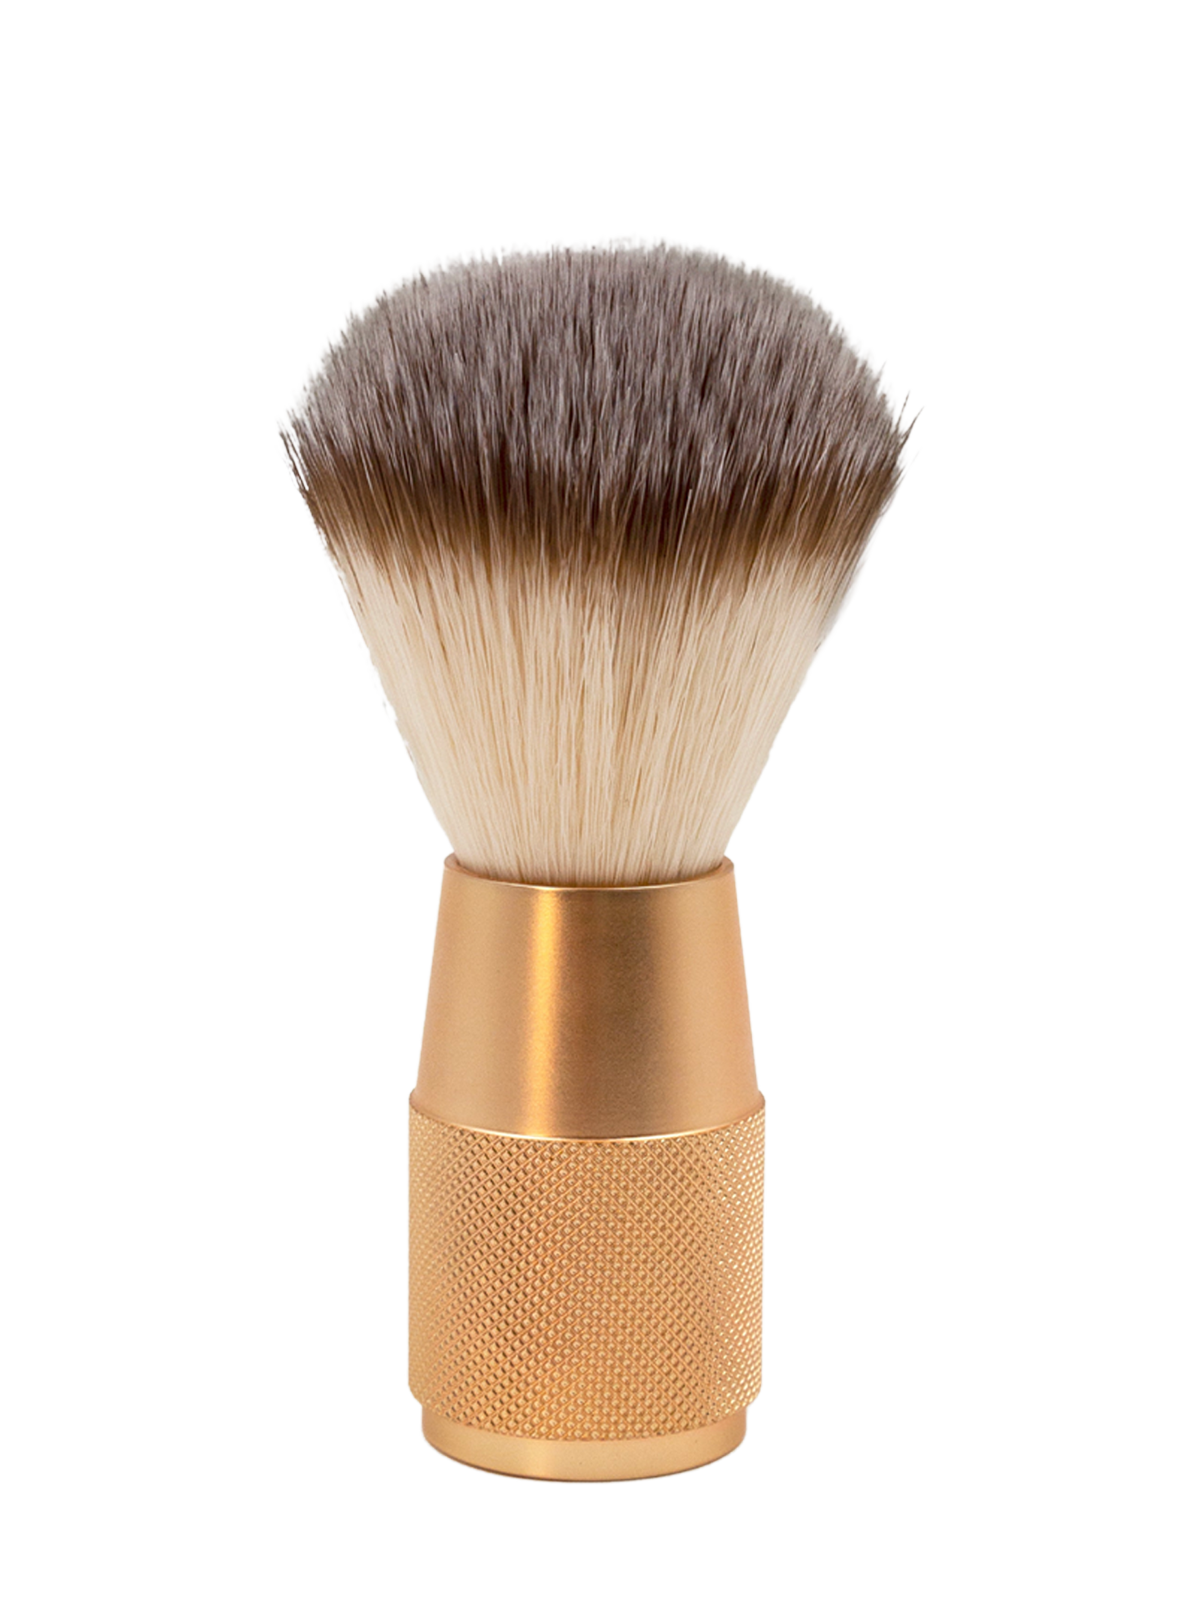 Shaving Brush in Rose Gold - The Collective